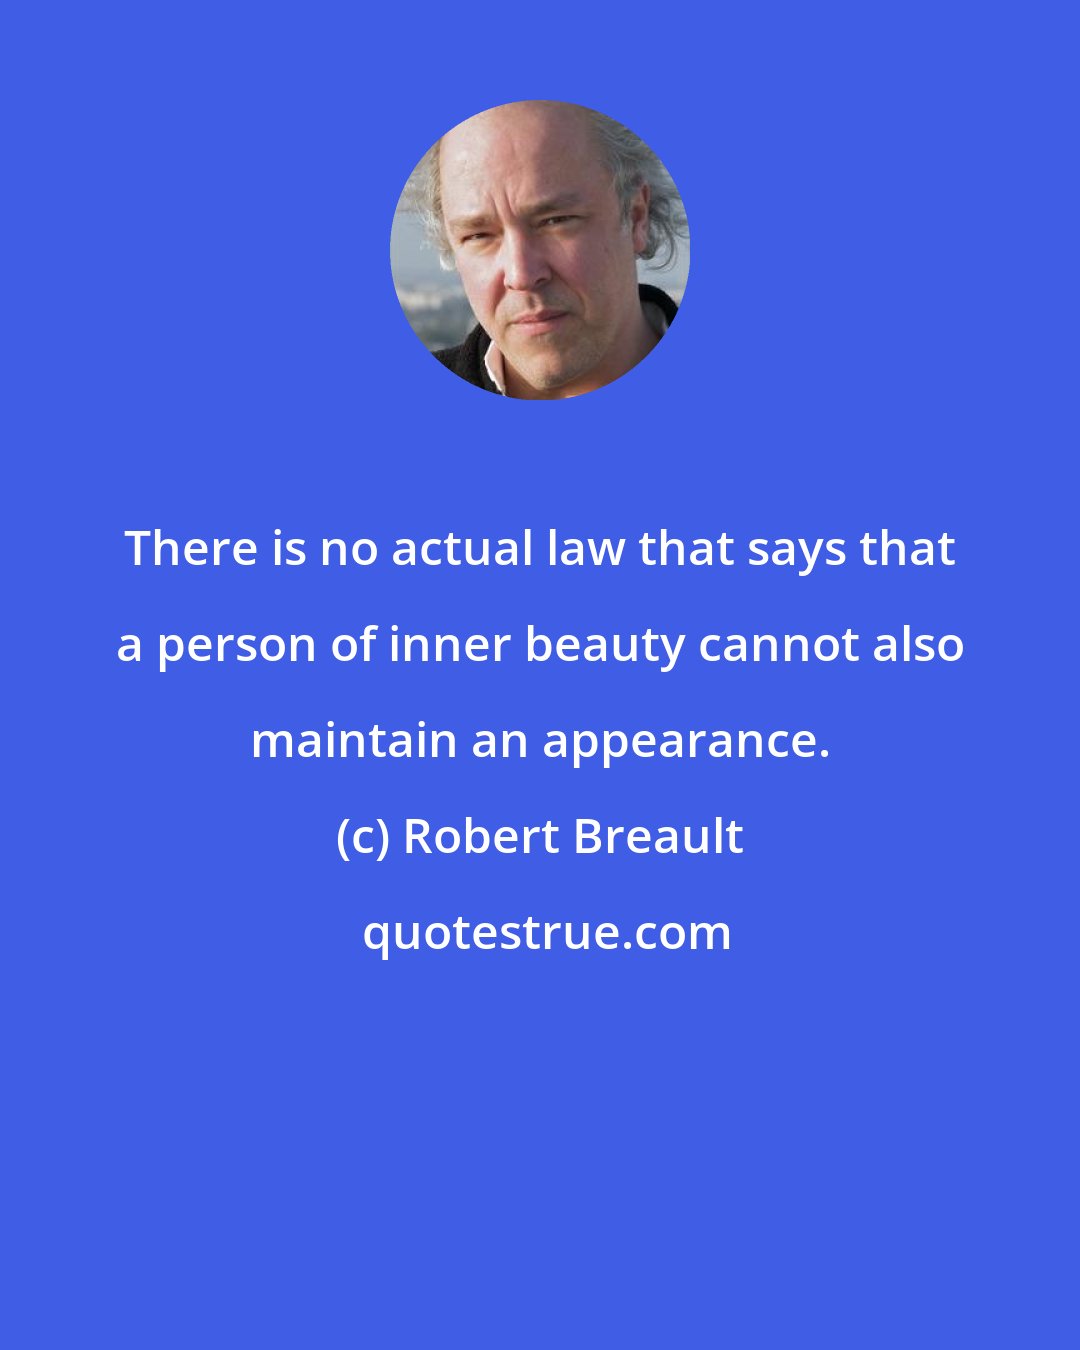 Robert Breault: There is no actual law that says that a person of inner beauty cannot also maintain an appearance.